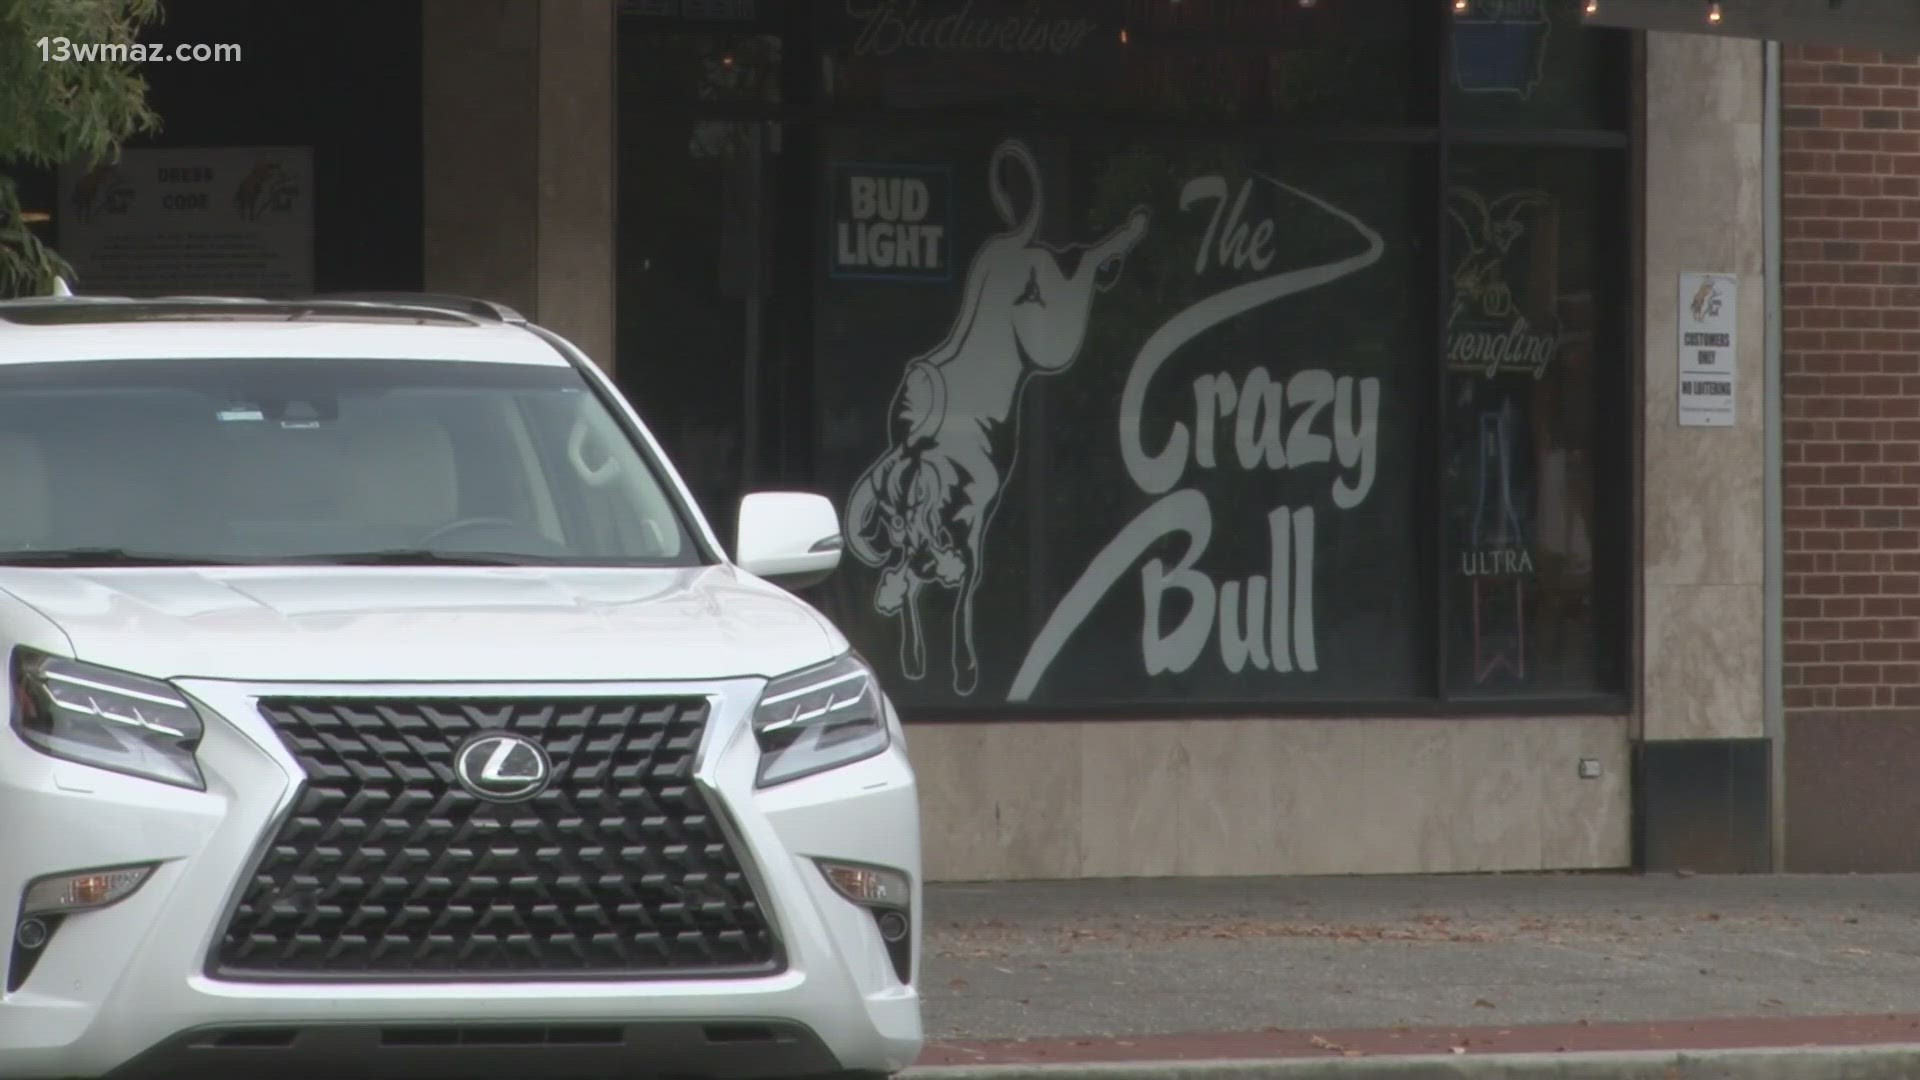 Rick Hill, owner of The Crazy Bull, passed away in July last year. His wife, Kim Hill, said in a statement that the decision to close its doors was difficult.